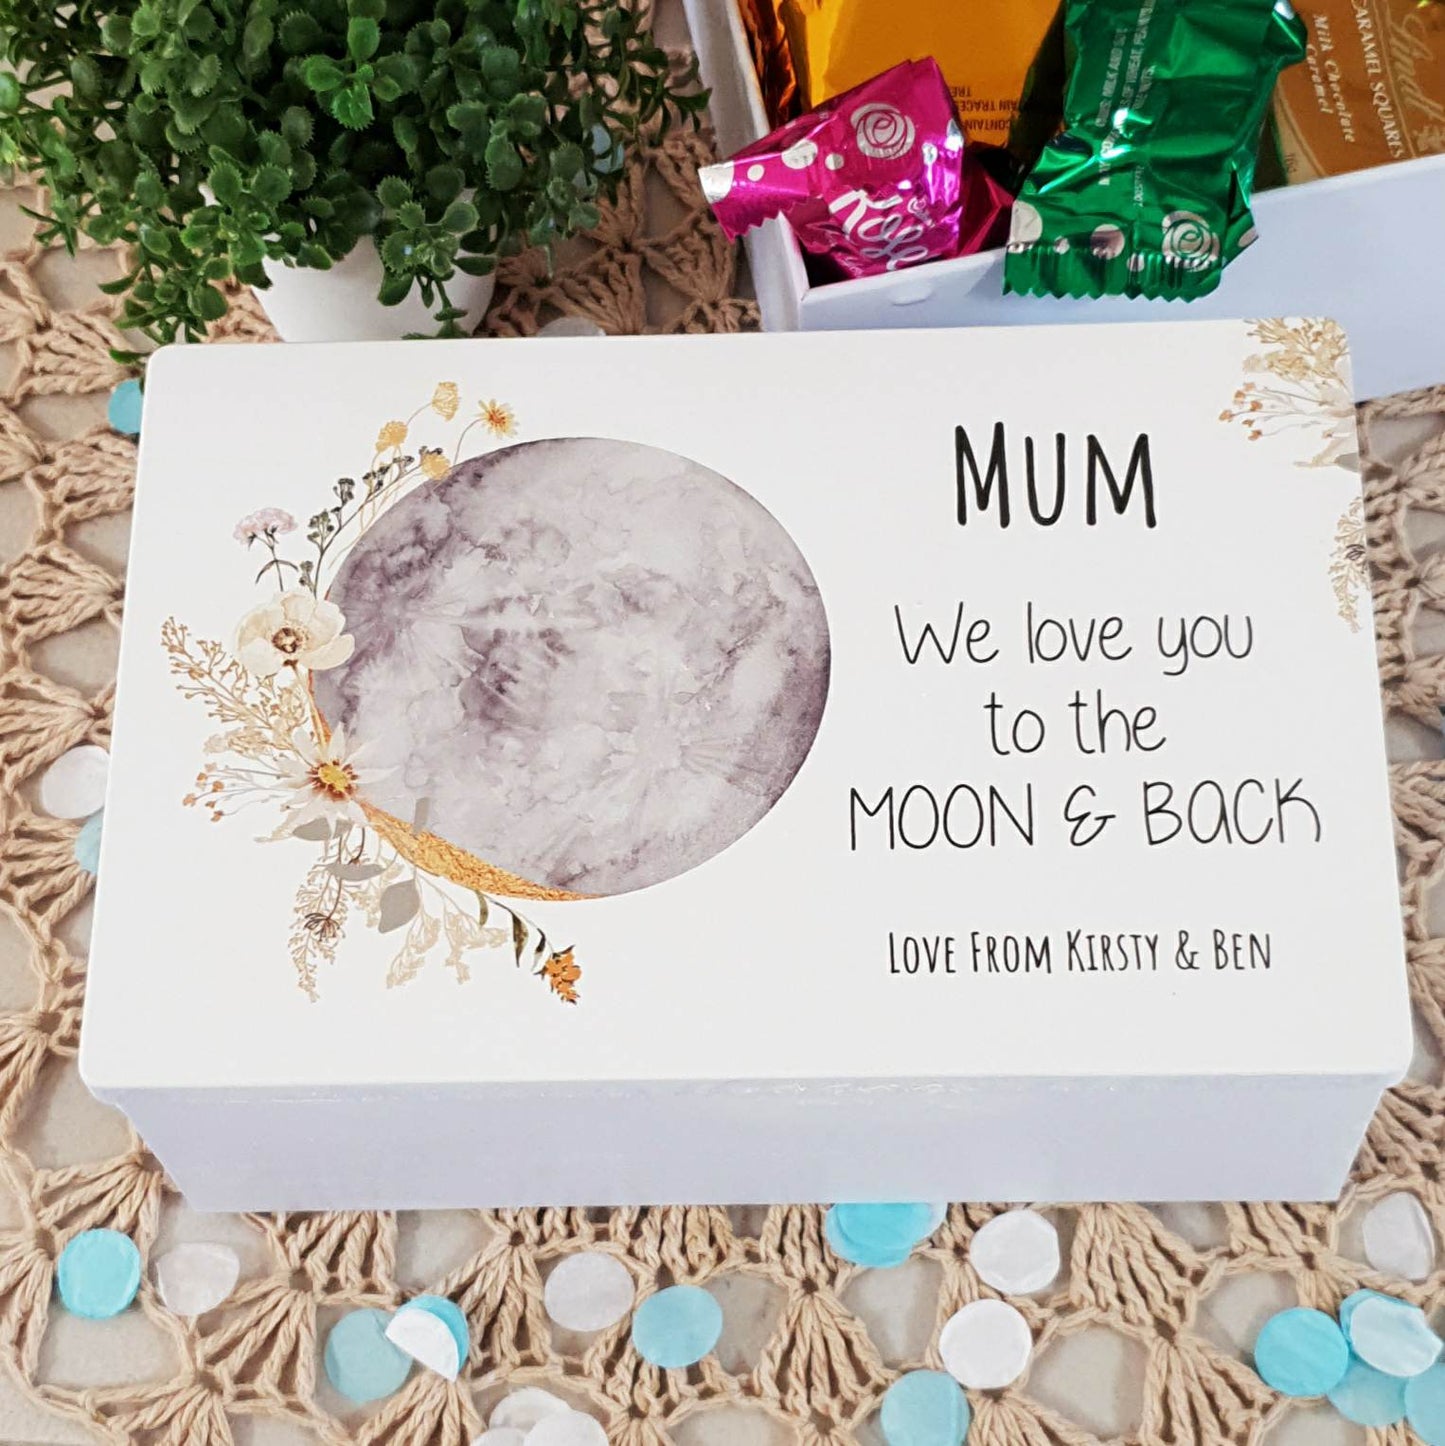 Mother's Day Personalised Tins - Mum can be changed to suit